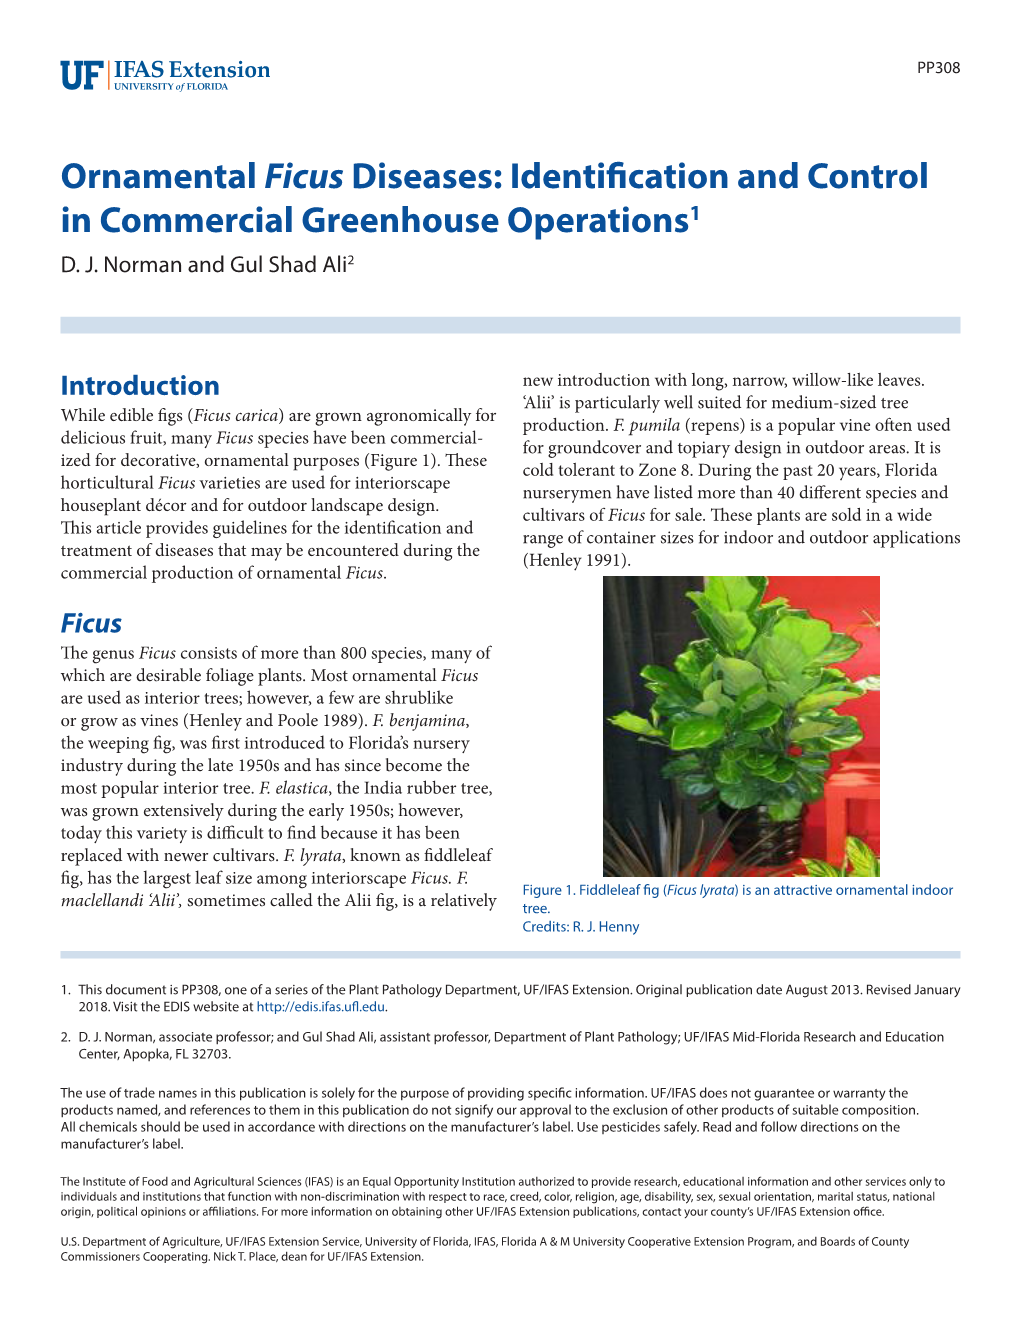 Ornamental Ficus Diseases: Identification and Control in Commercial Greenhouse Operations1 D